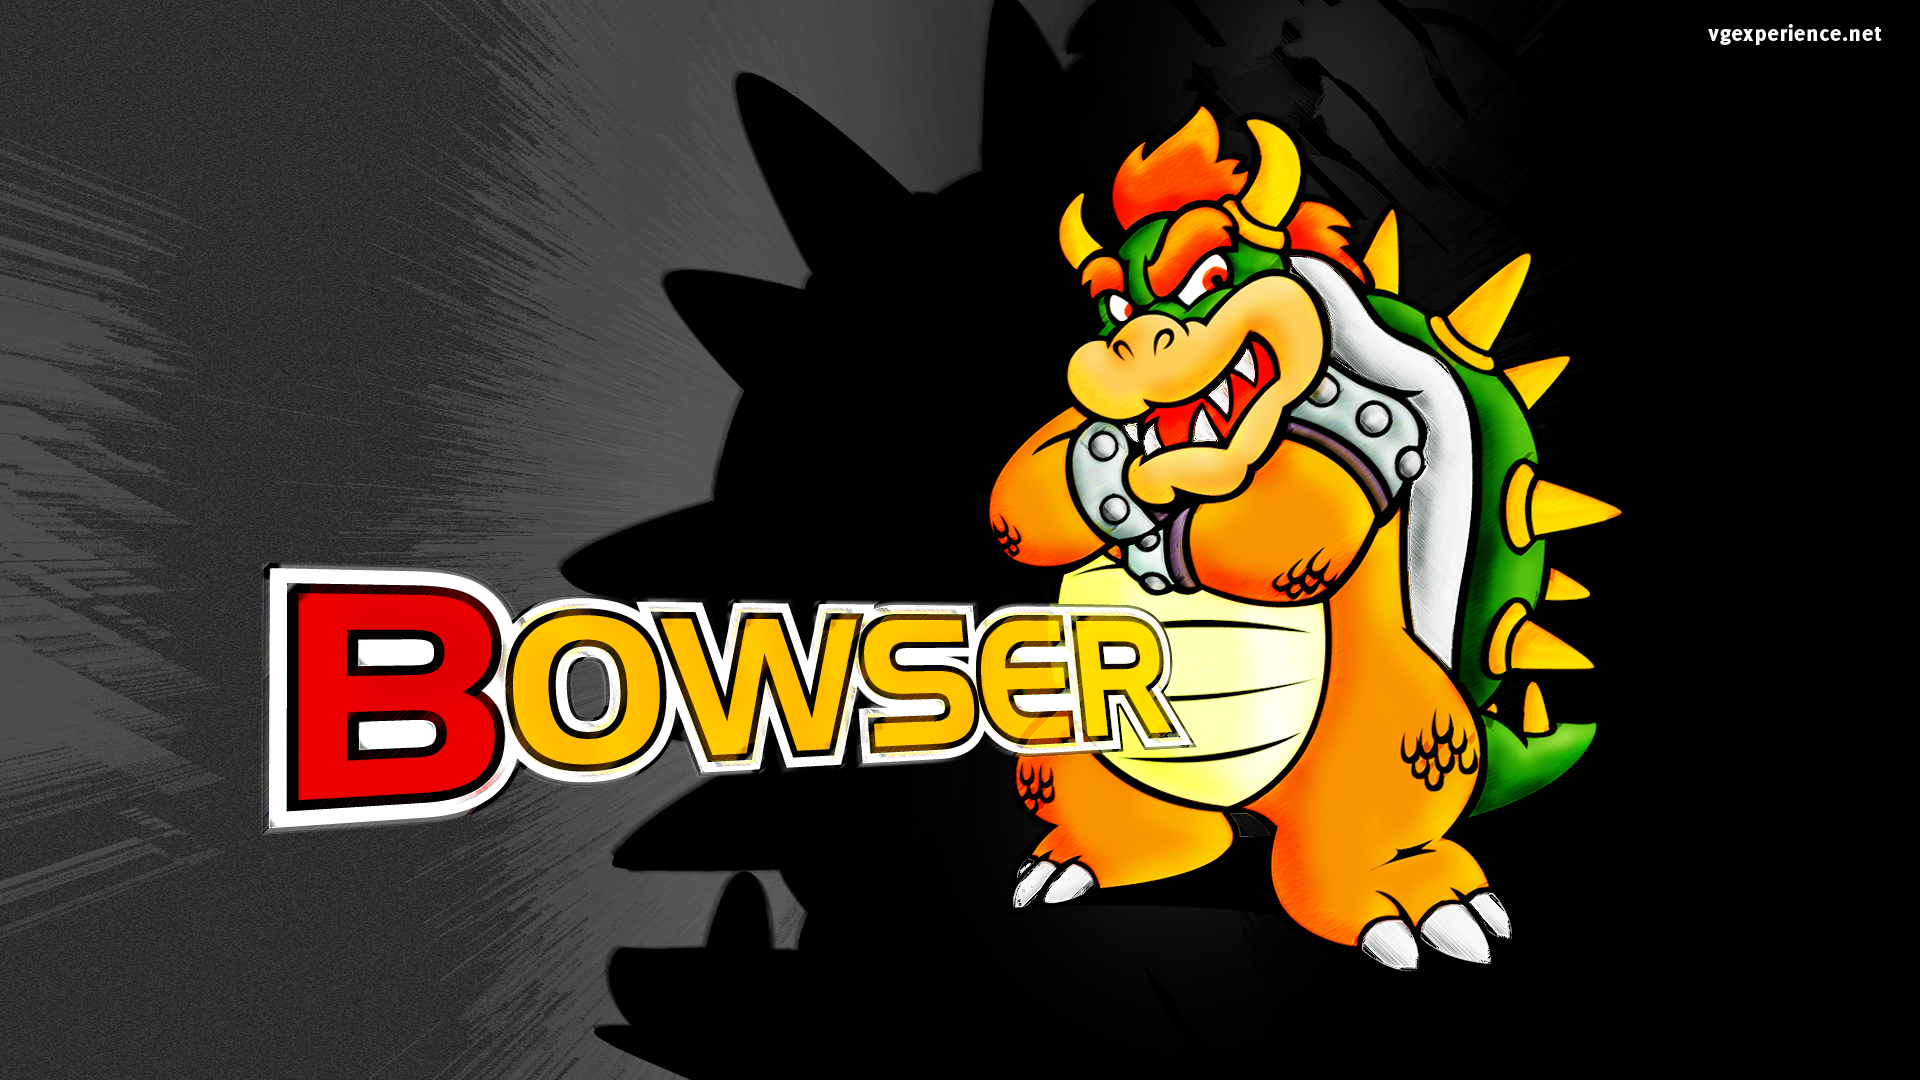 Bowser wallpaper for desktop, download free Bowser picture and background for PC